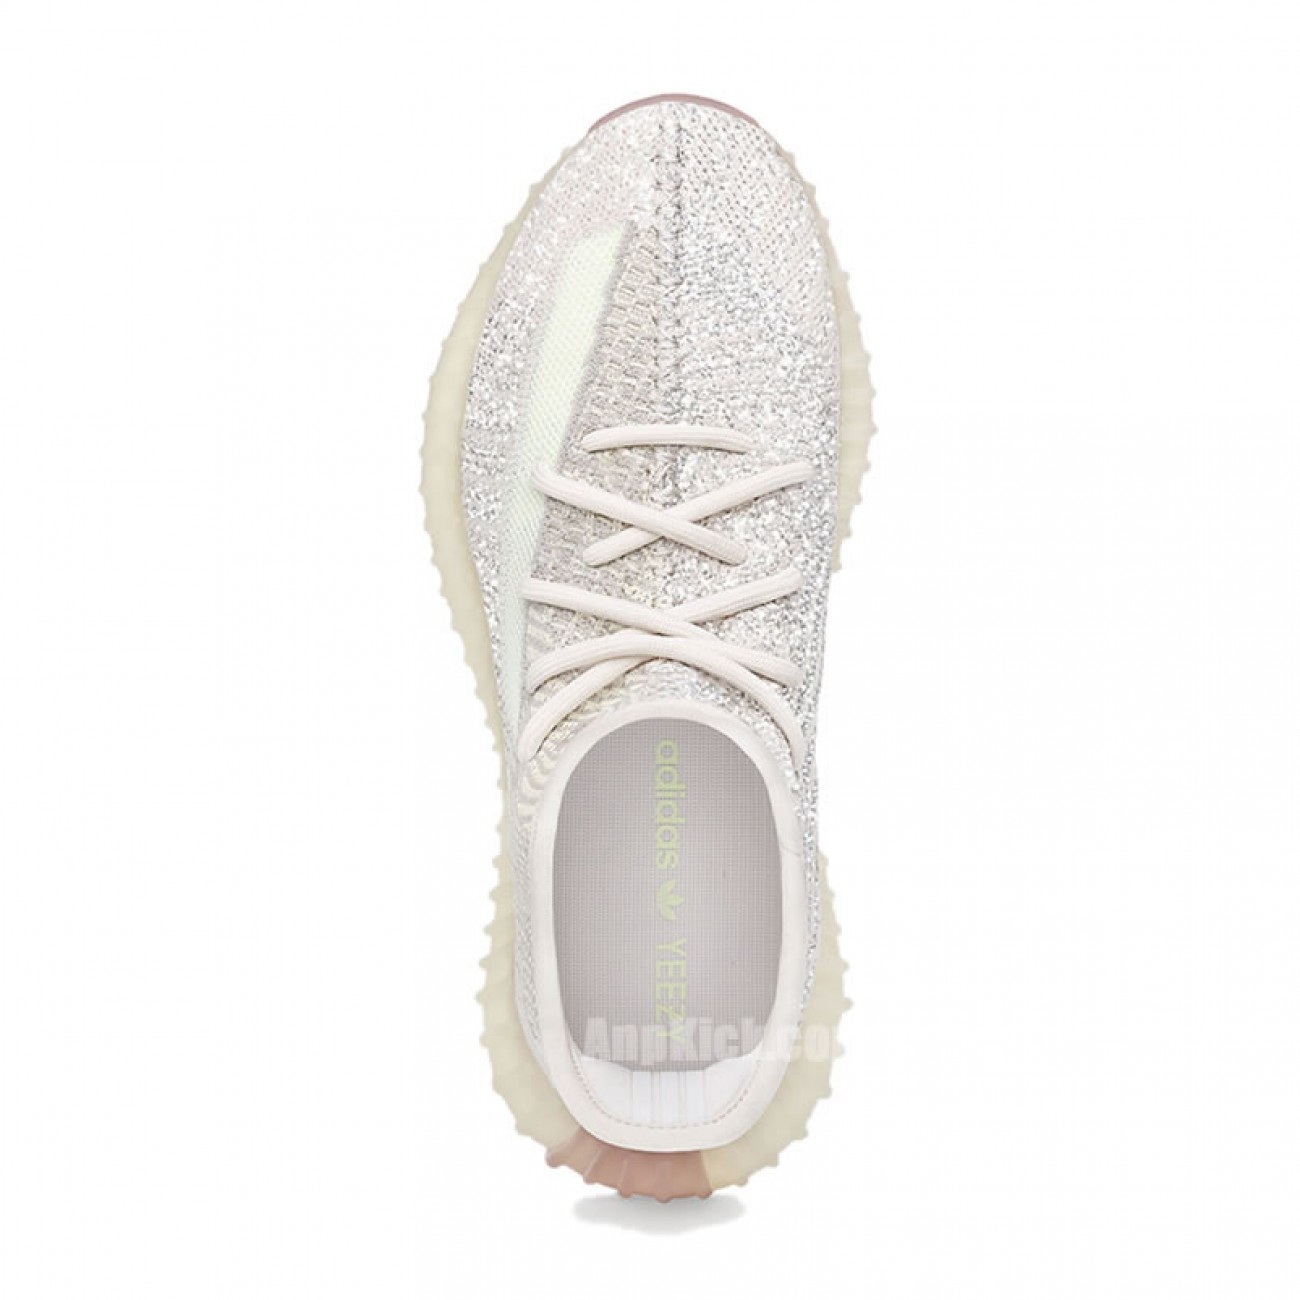 adidas Yeezy Boost 350 V2 "Citrin" Reflective Release Date FW5318